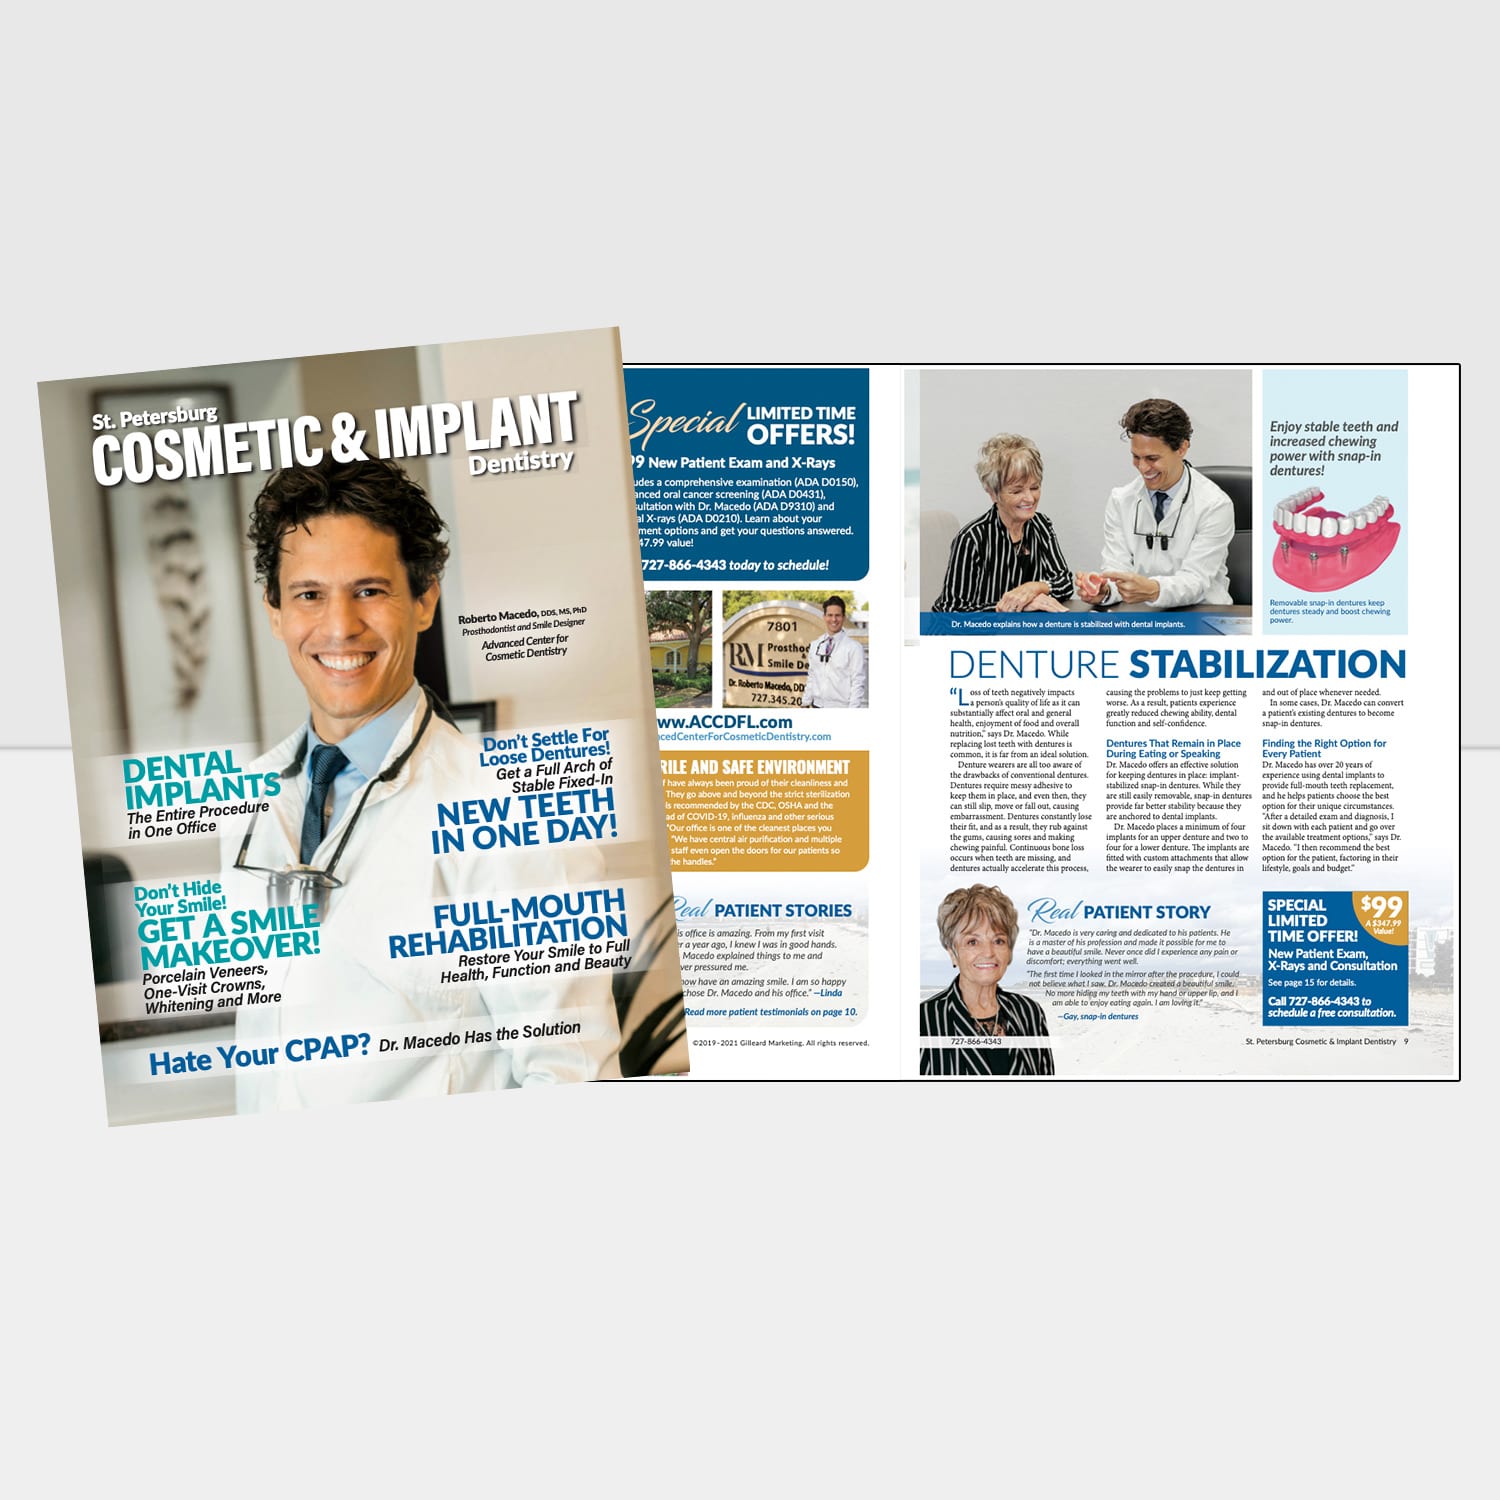 Mockup of the Advanced Center for Cosmetic Dentistry in St. Petersberg, FL magazine created by Gilleard Marketing for effective marketing for prosthodontists.